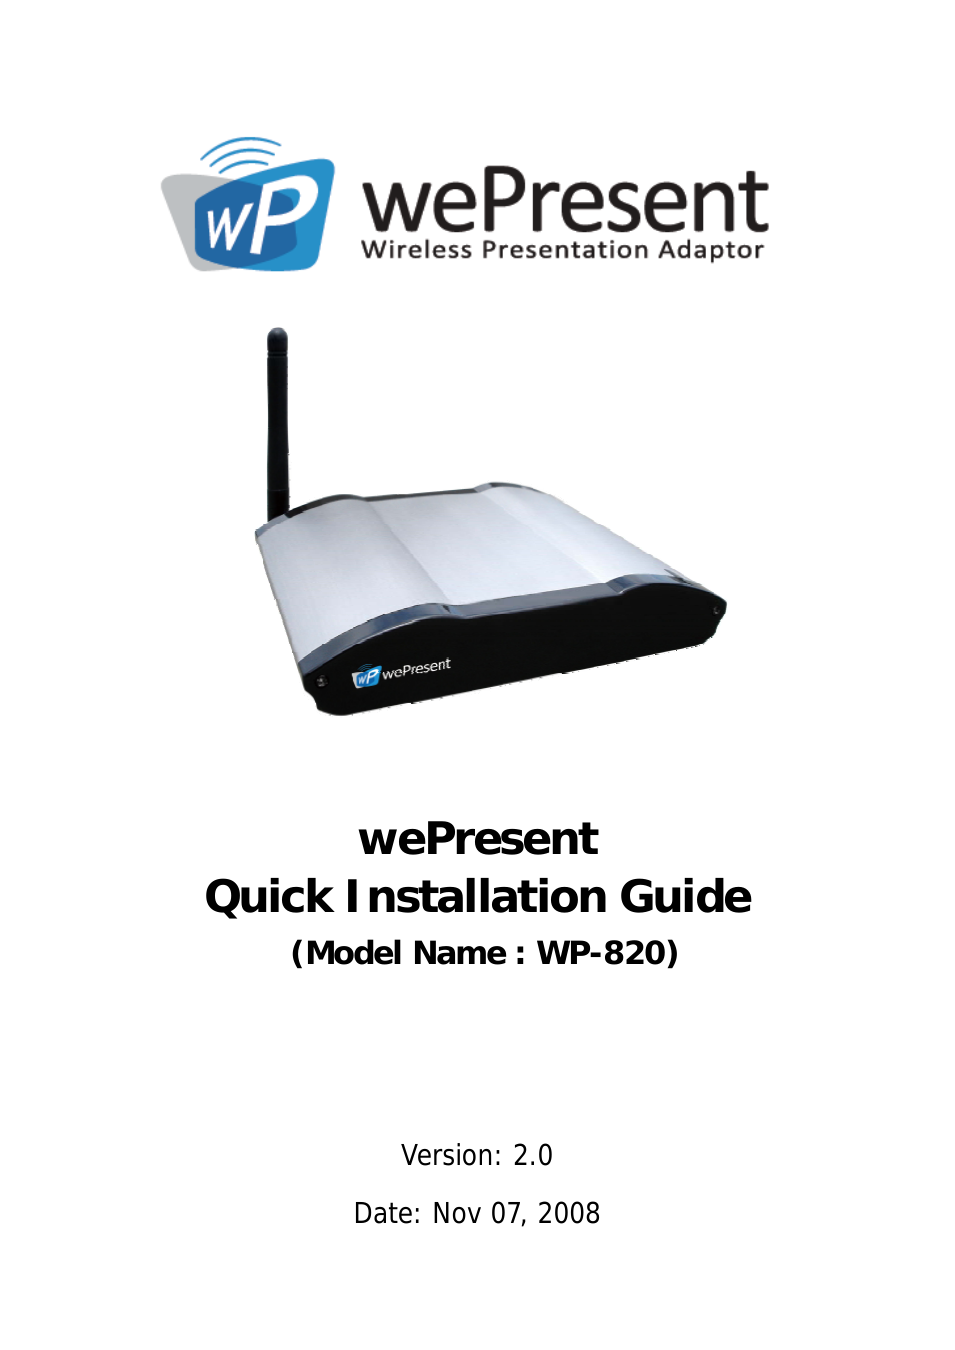 wePresent WiPG-820 Quick Install Guide